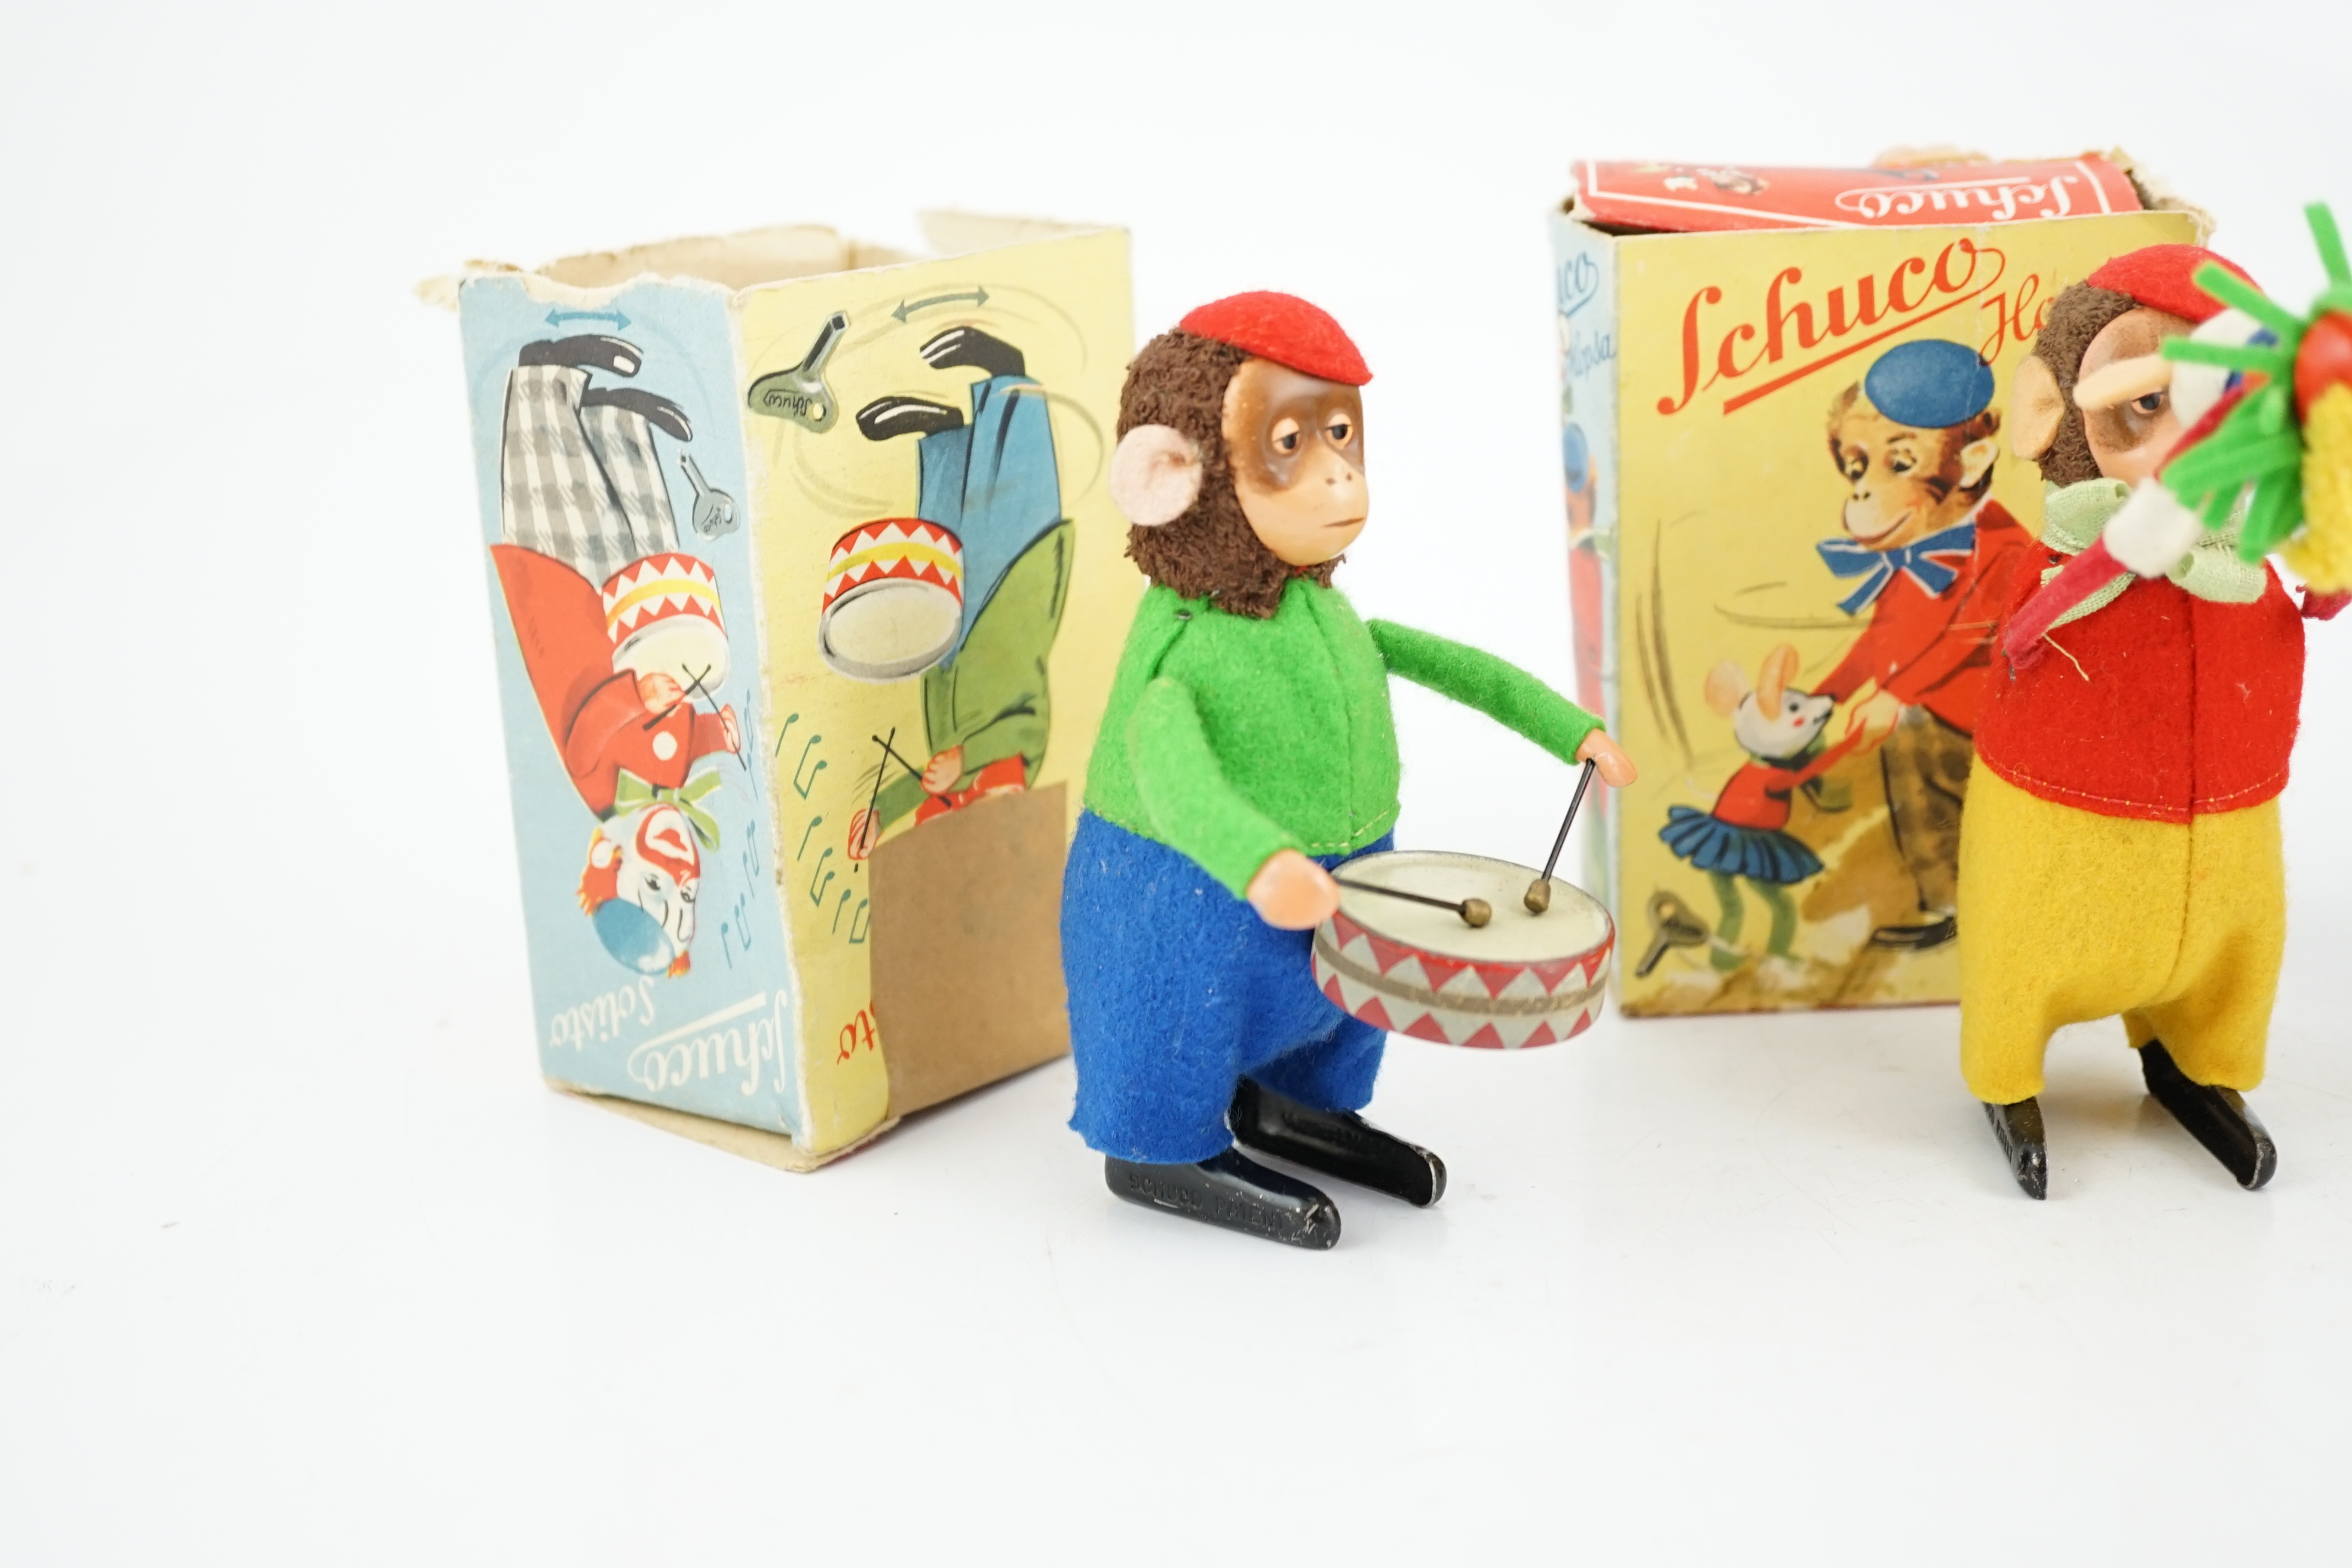 Three Schuco tinplate and felt clockwork monkeys; Hopsa, Solisto and Sousto, all contained within - Image 2 of 8